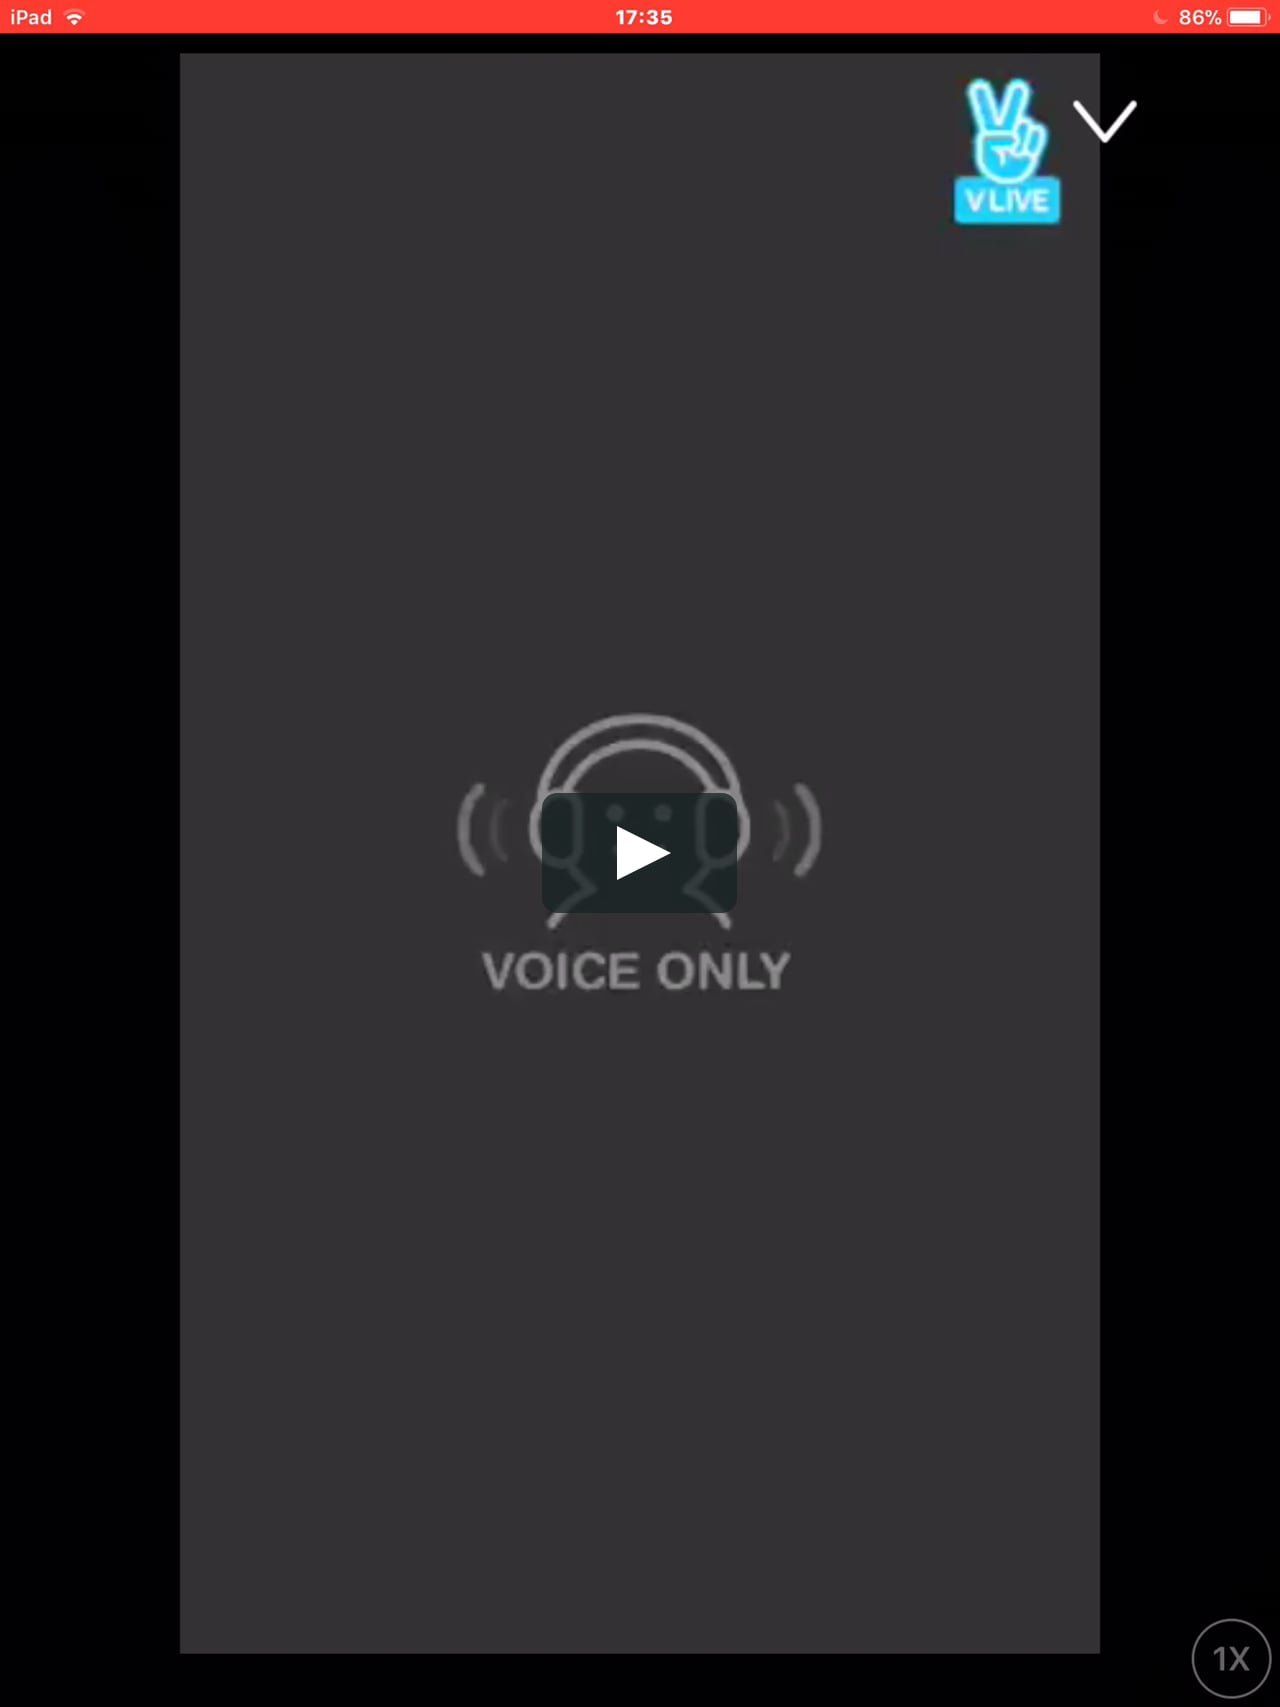 vlive app how to turn off autoplay